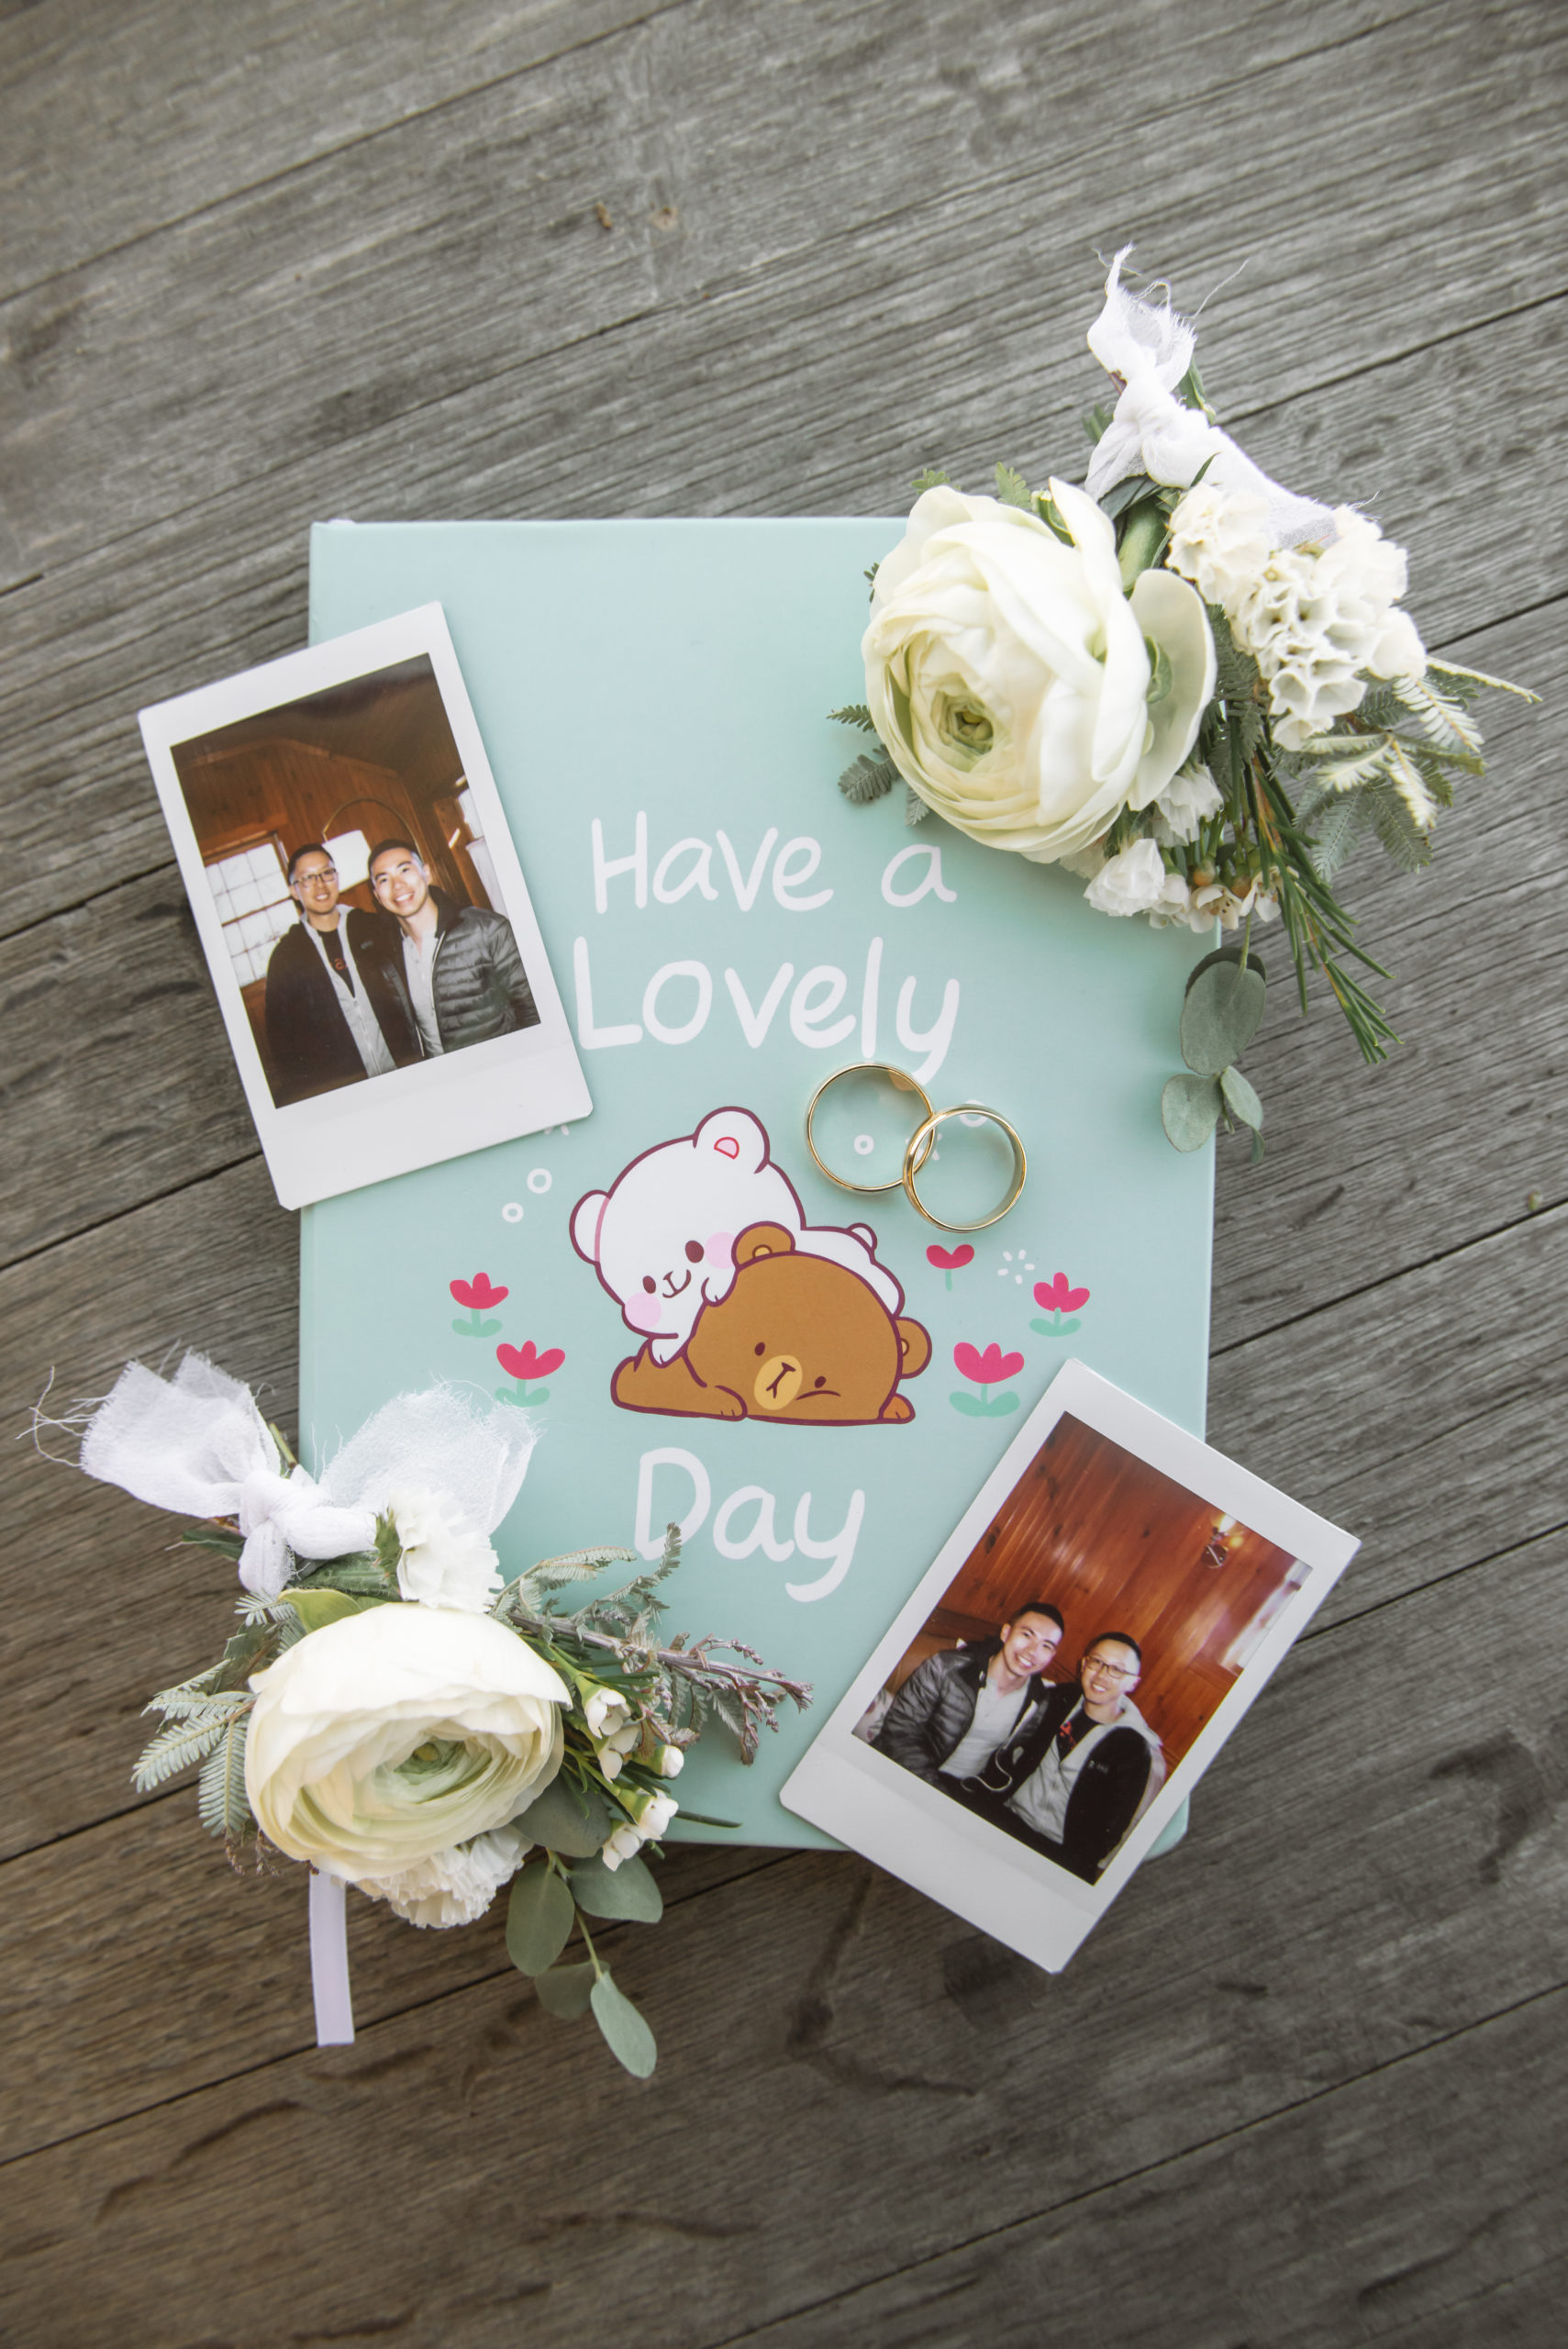 Detail of the grooms' two gold wedding bands, two boutonnieres, two polaroid photos of the grooms, and the wedding vow book which has the words "Have a Lovely Day" written on it. The journal has illustrations of one white bear and one brown bear and they are flanked by pink flowers and white sparkle/bubble motifs.